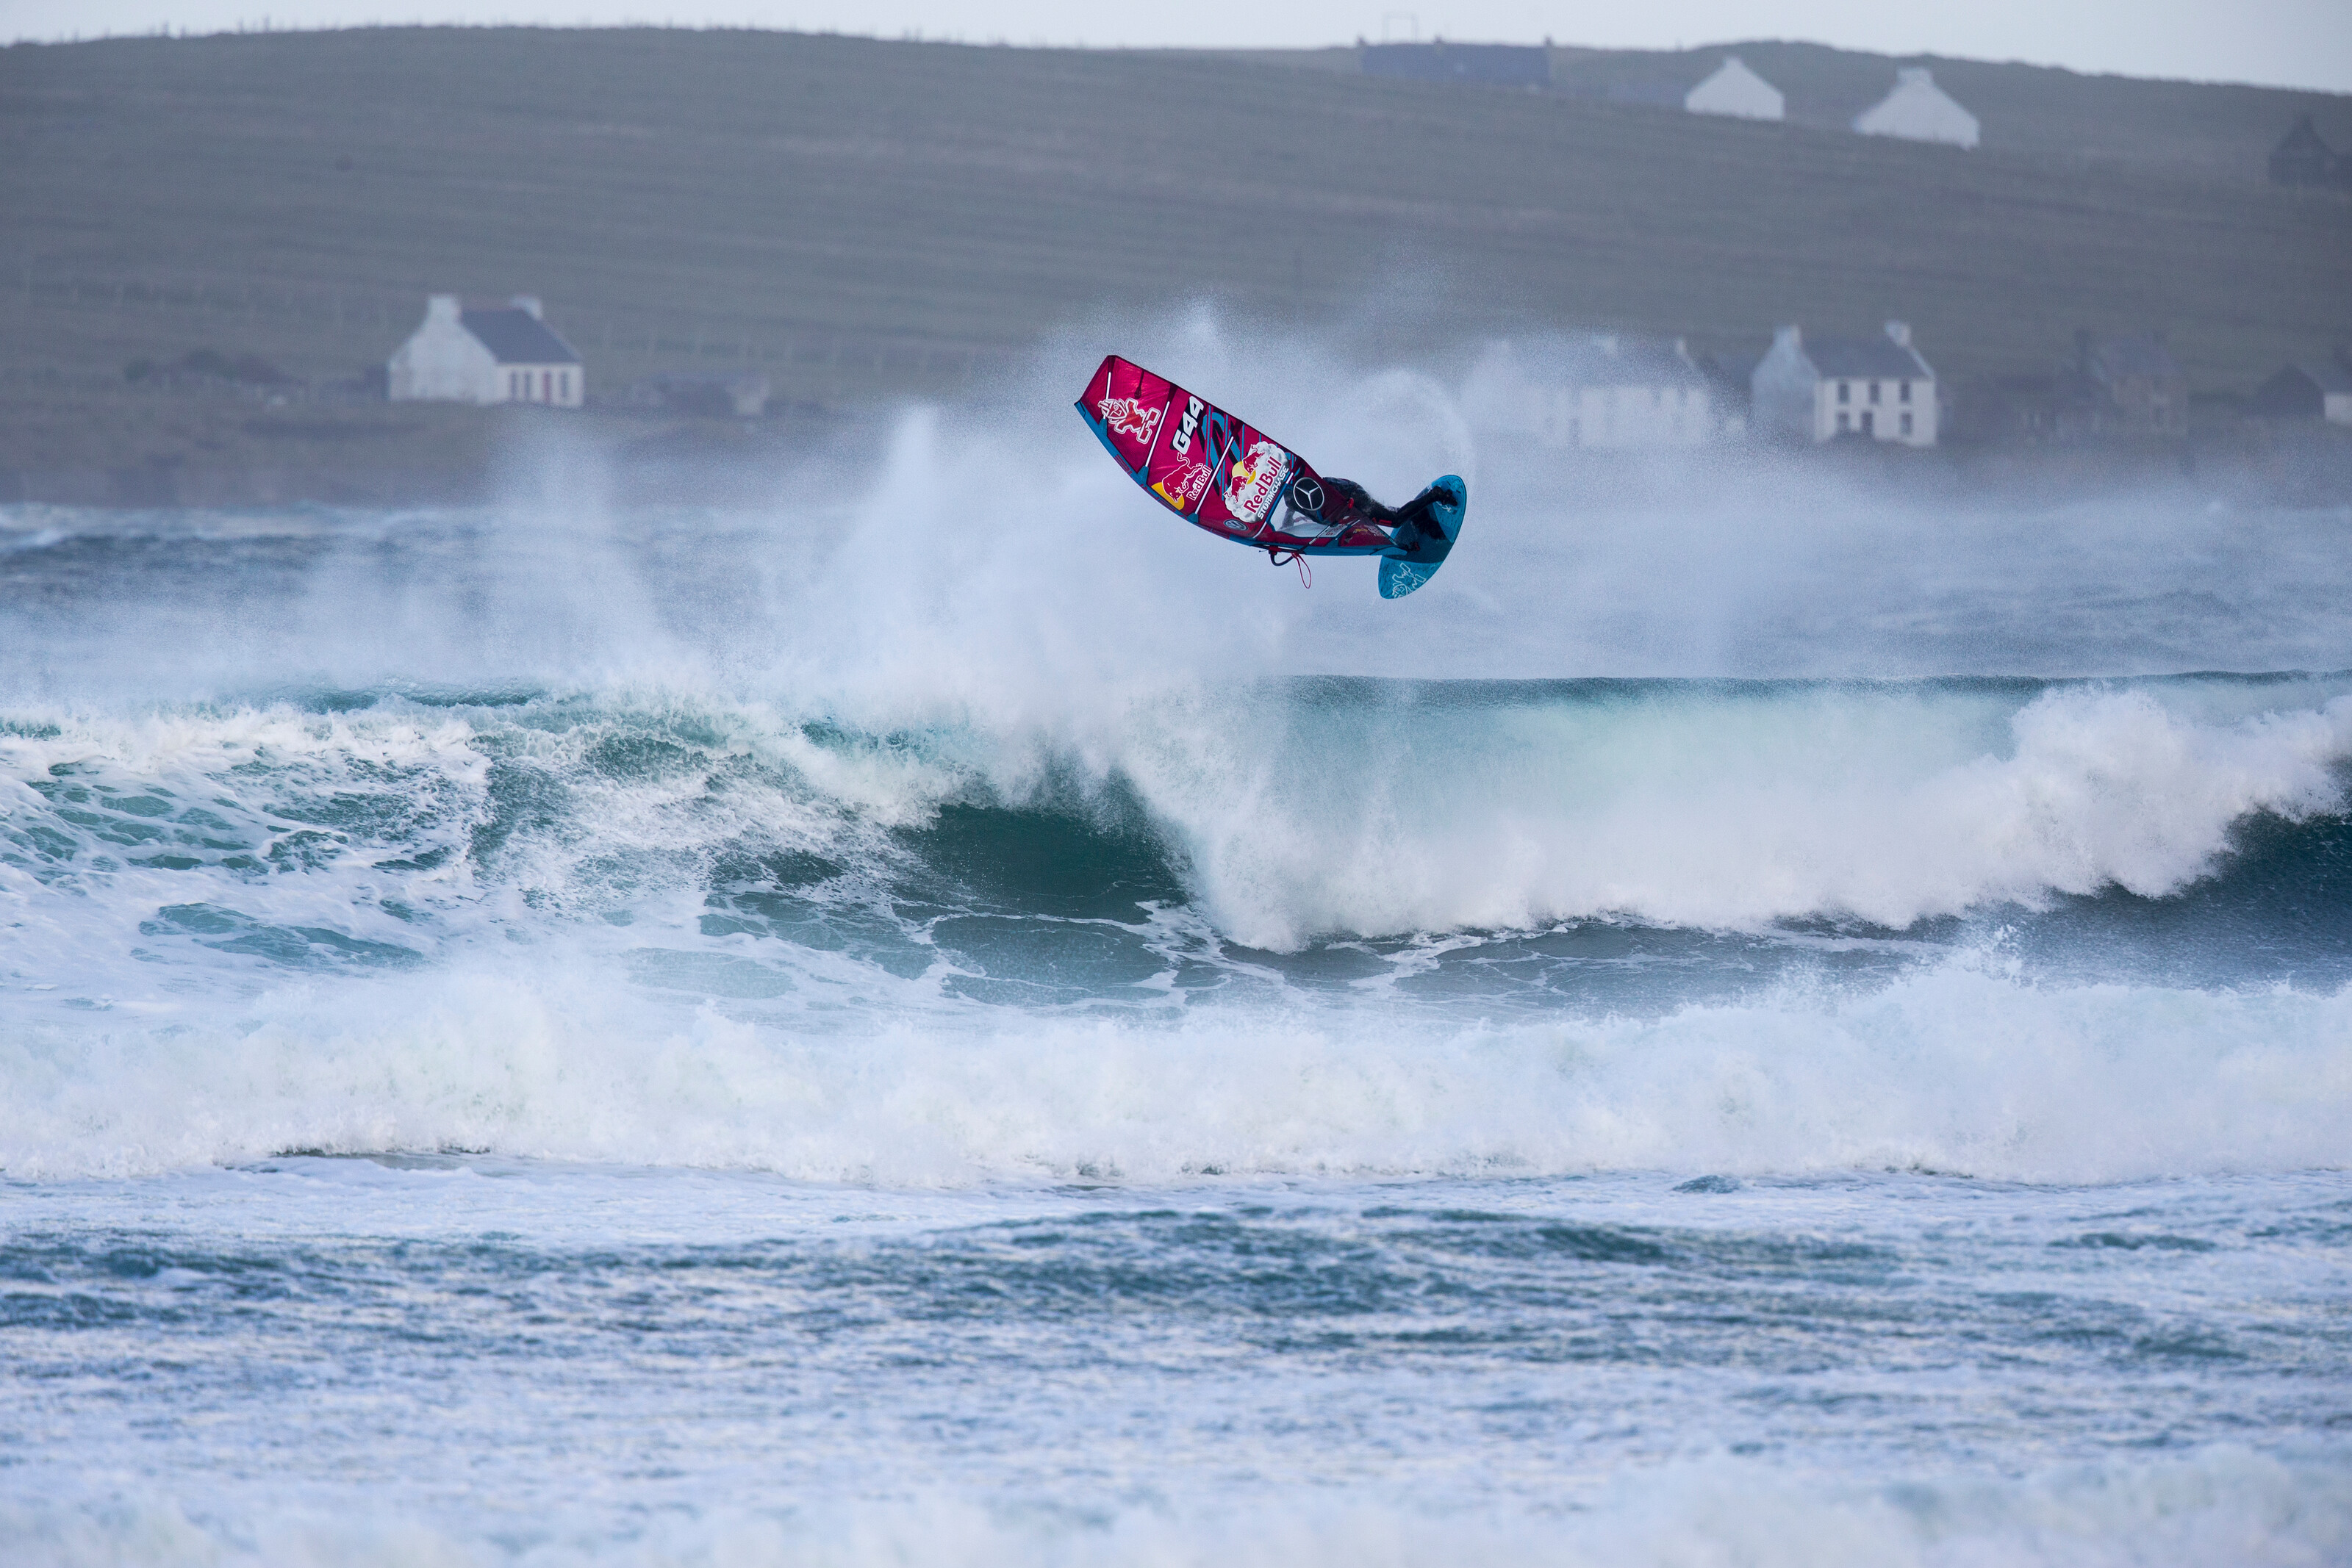 Philip Koester of Germany performs at the Red Bull Storm Chase in Magheroarty, Ireland on March 12, 2019. // John Carter/Red Bull Content Pool